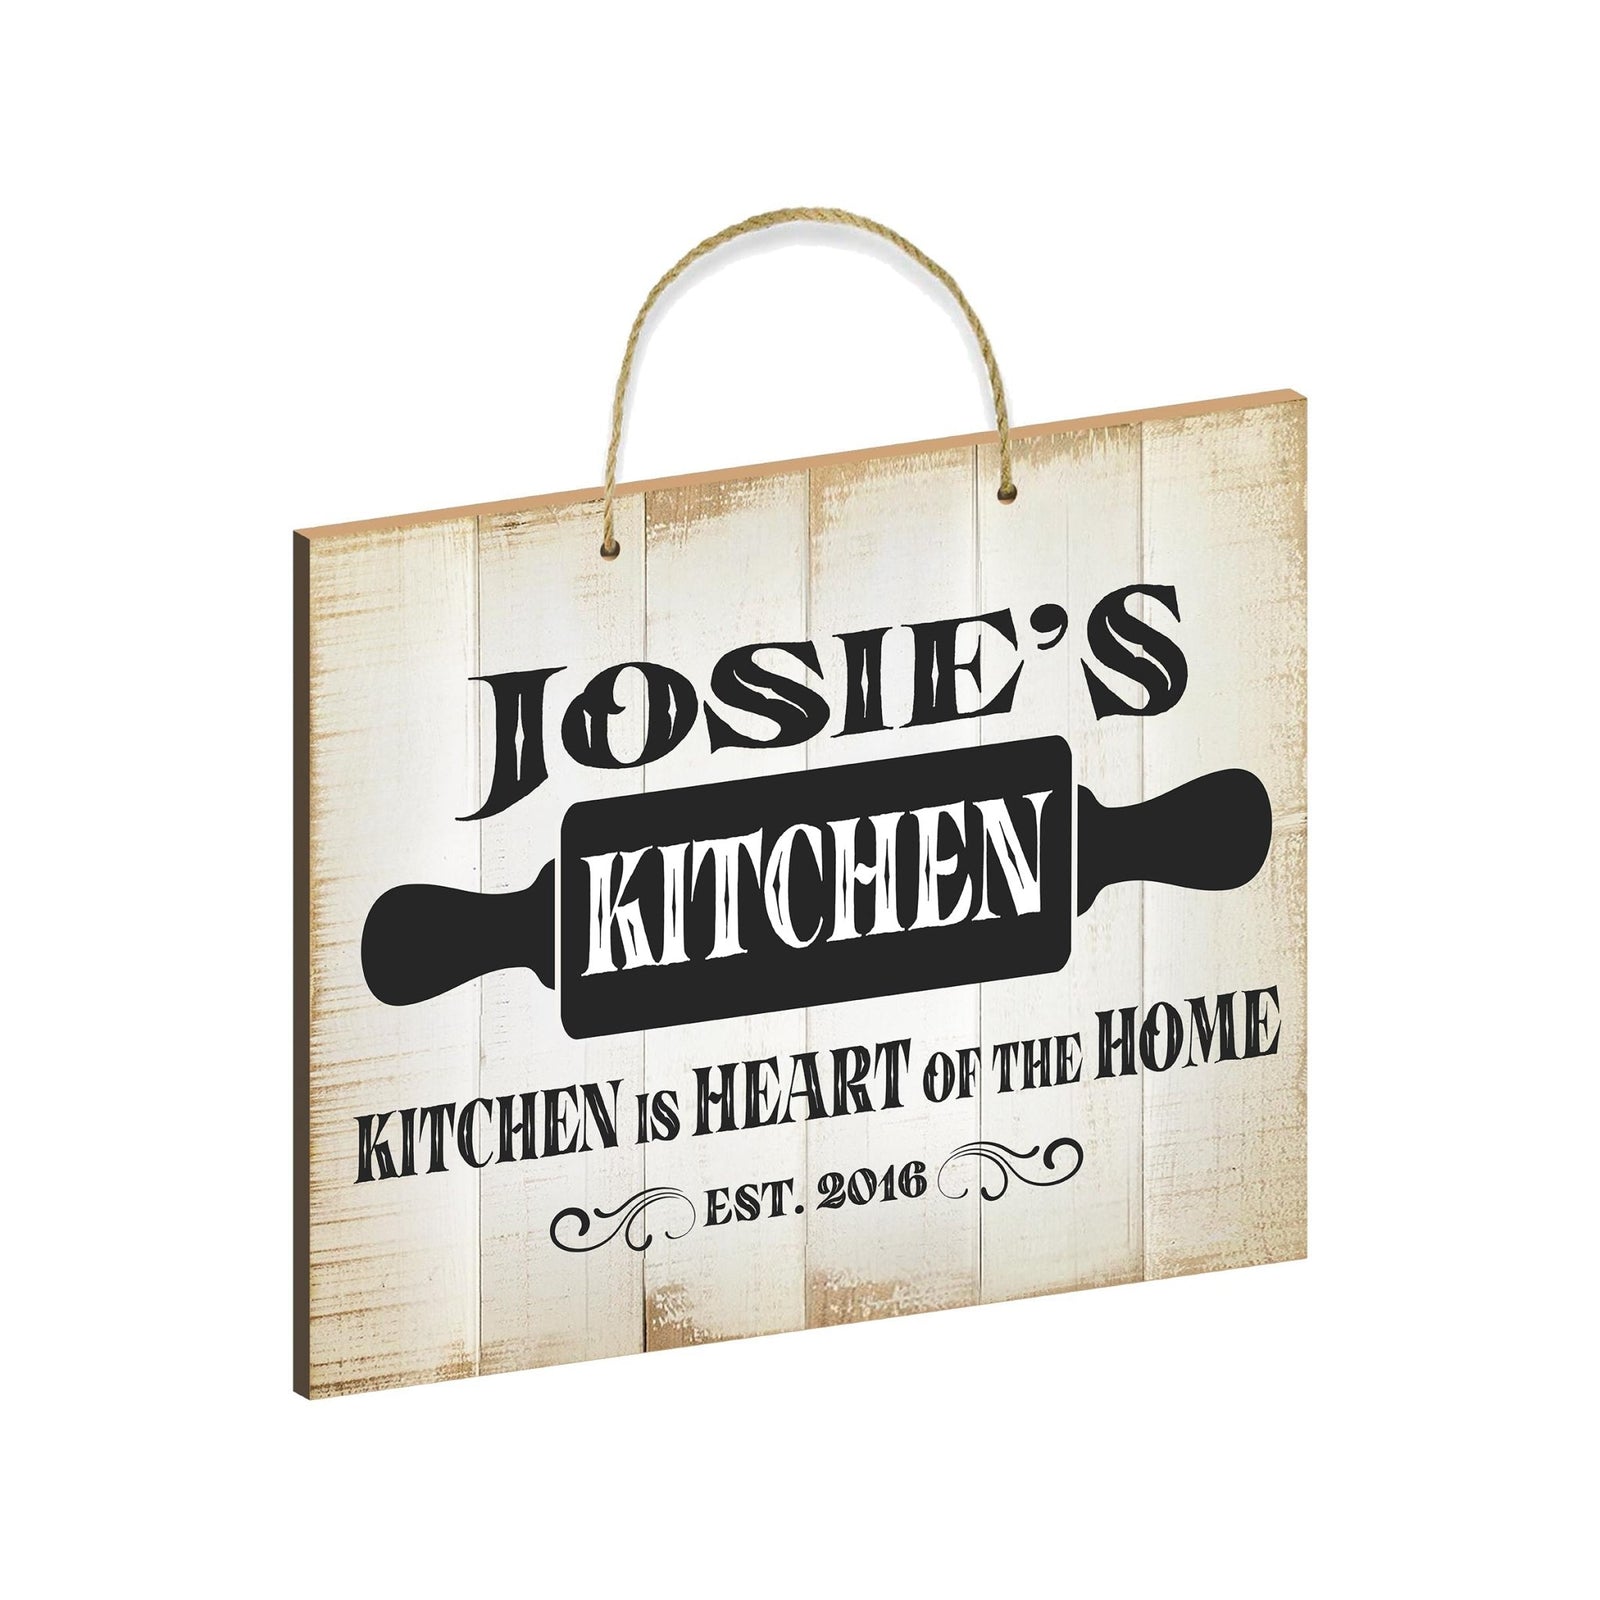 Rustic-Inspired Wooden Wall Hanging Rope Sign For Kitchen & Home Décor - Kitchen Is Heart 2